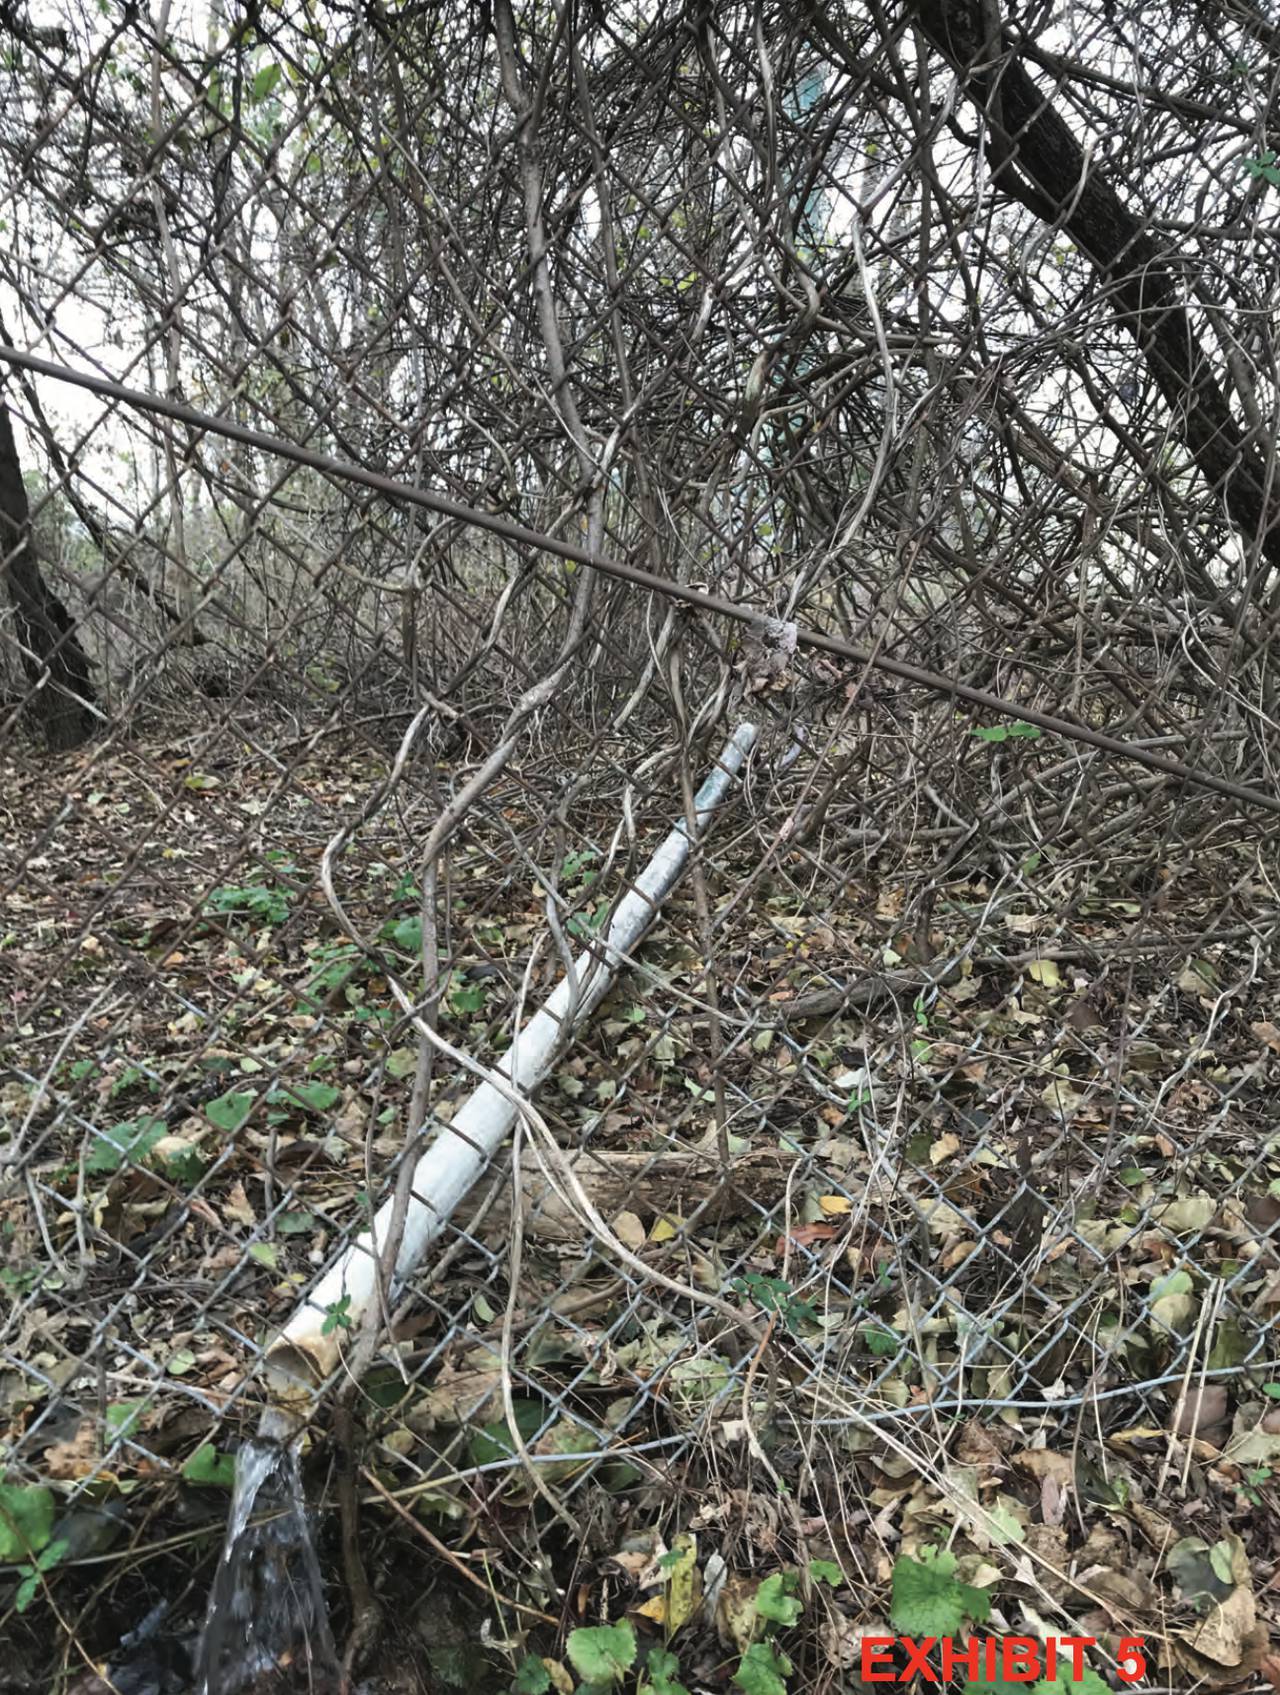 State investigators found that Curtis Bay Energy was discharging wastewater onto an adjacent property via an unpermitted hose that ran through the woods to the property fence line.